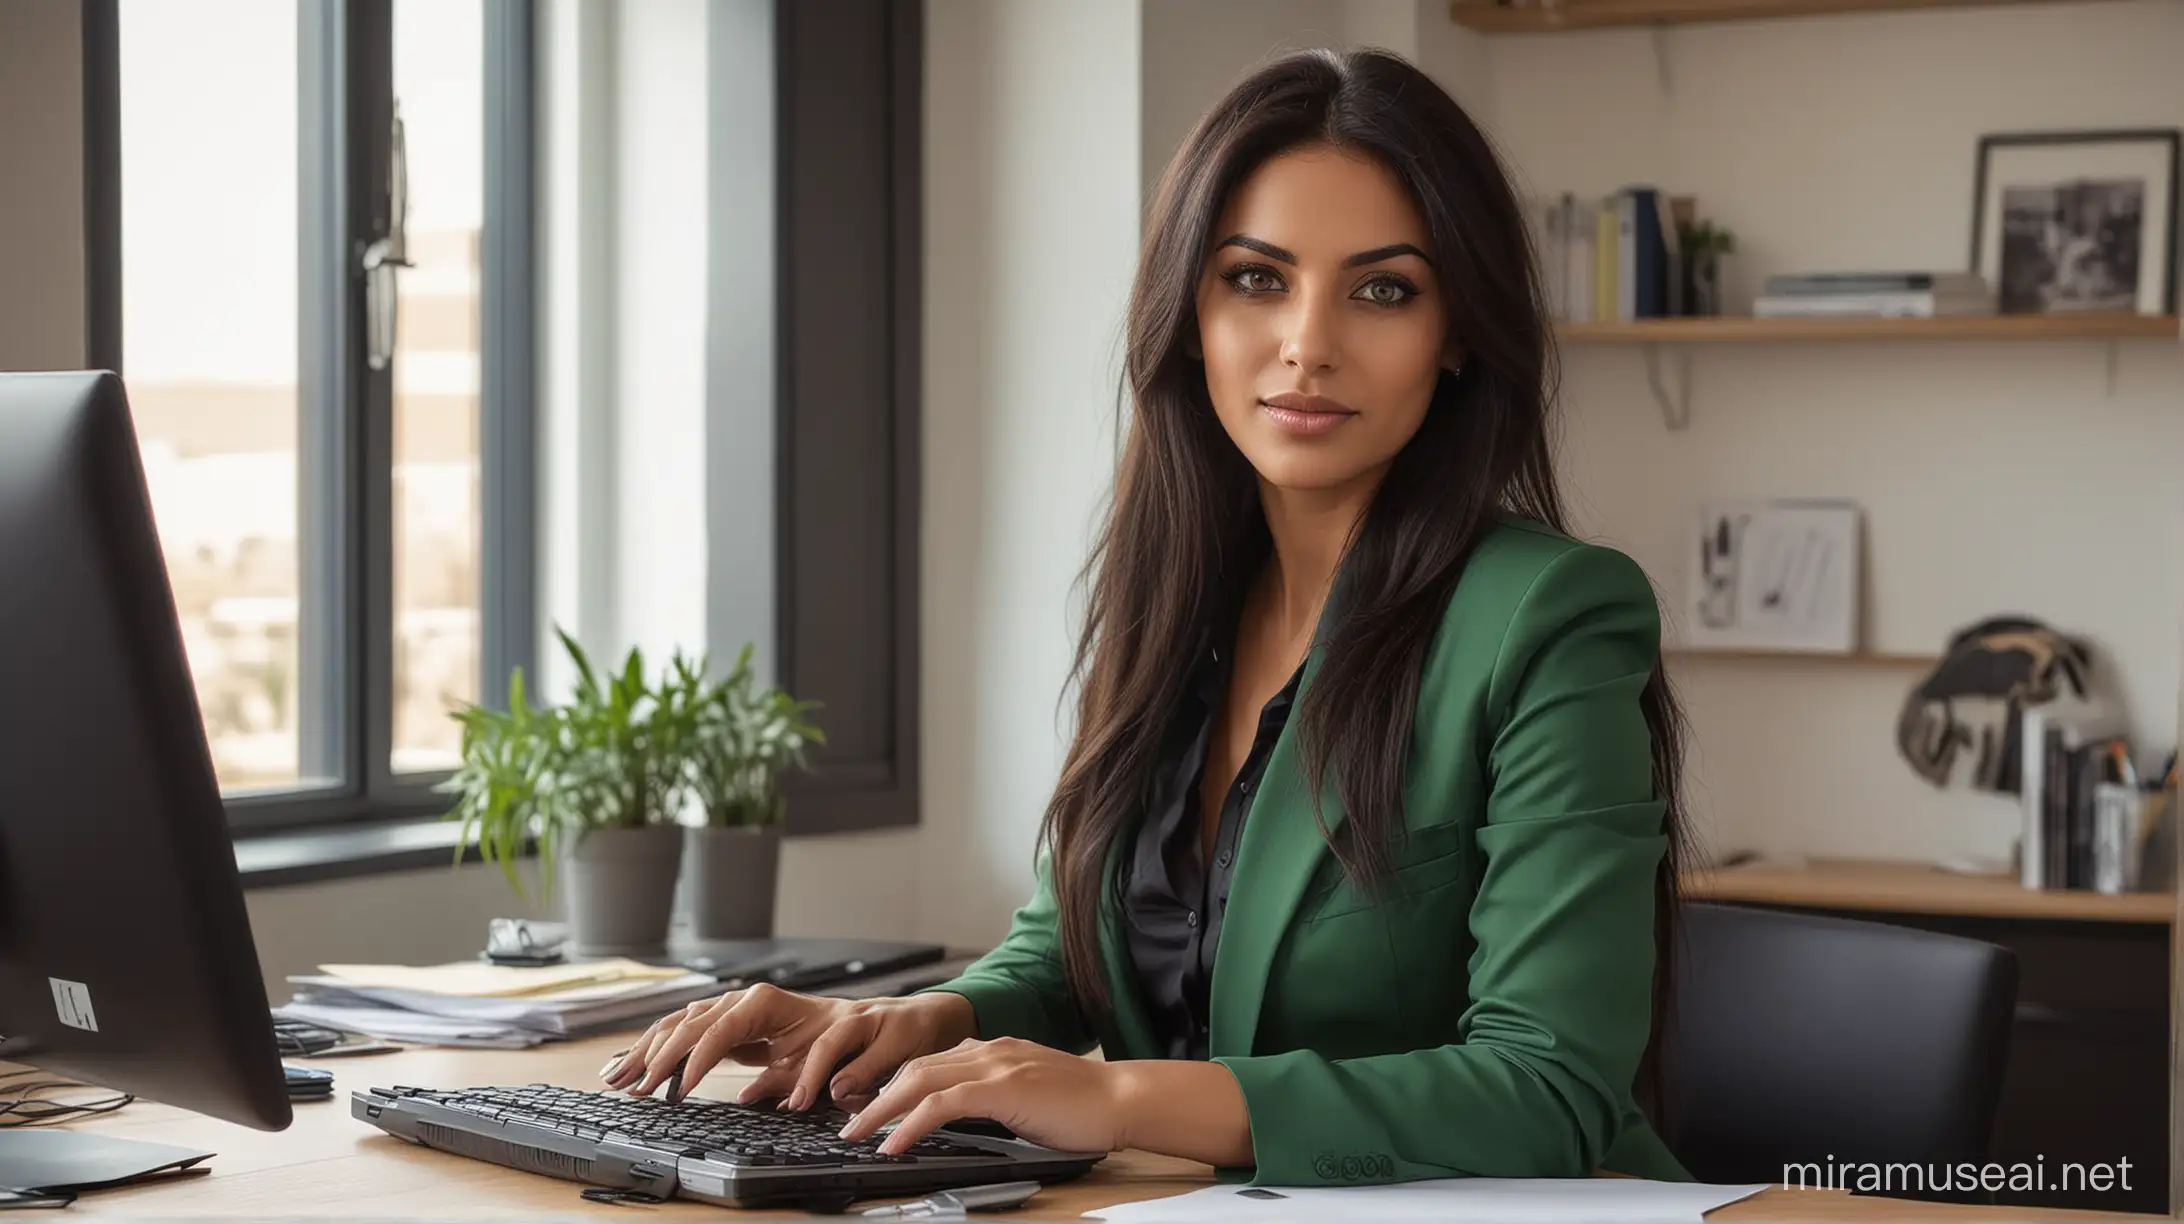 real photo, realism, only one brunette woman with emerald green eyes and black long hair, dark brown skin like the desert, arabic egyptian, 35 years old, office work clothes with a office jacket, working at one desk at home with one laptop, long hair, near the window, desk, home, modern living, sexy, sitting in an office chair